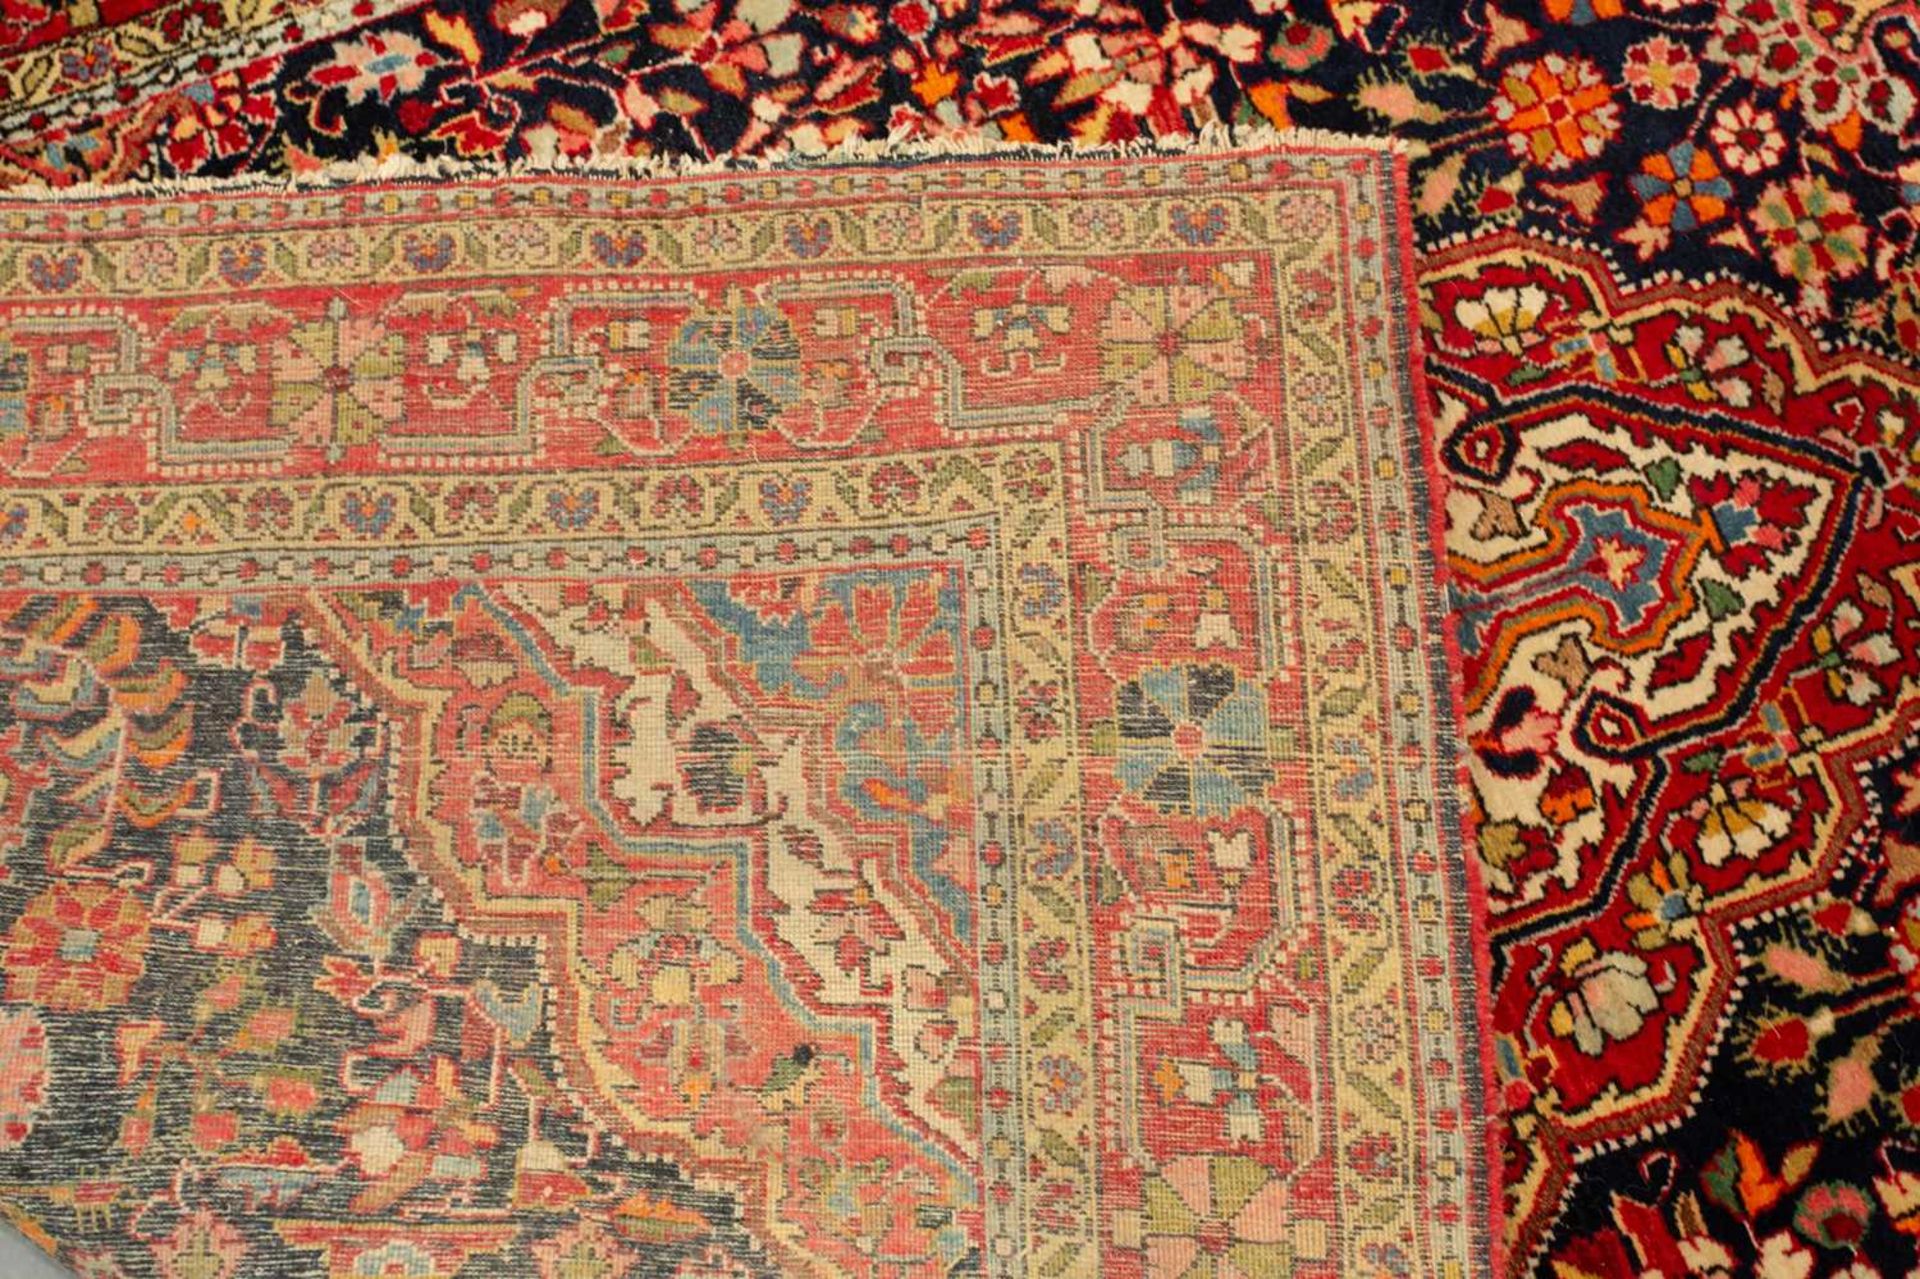 A dark blue ground Baktiari rug, 20th century, with a central lozenge with stylized lanterns - Image 2 of 5